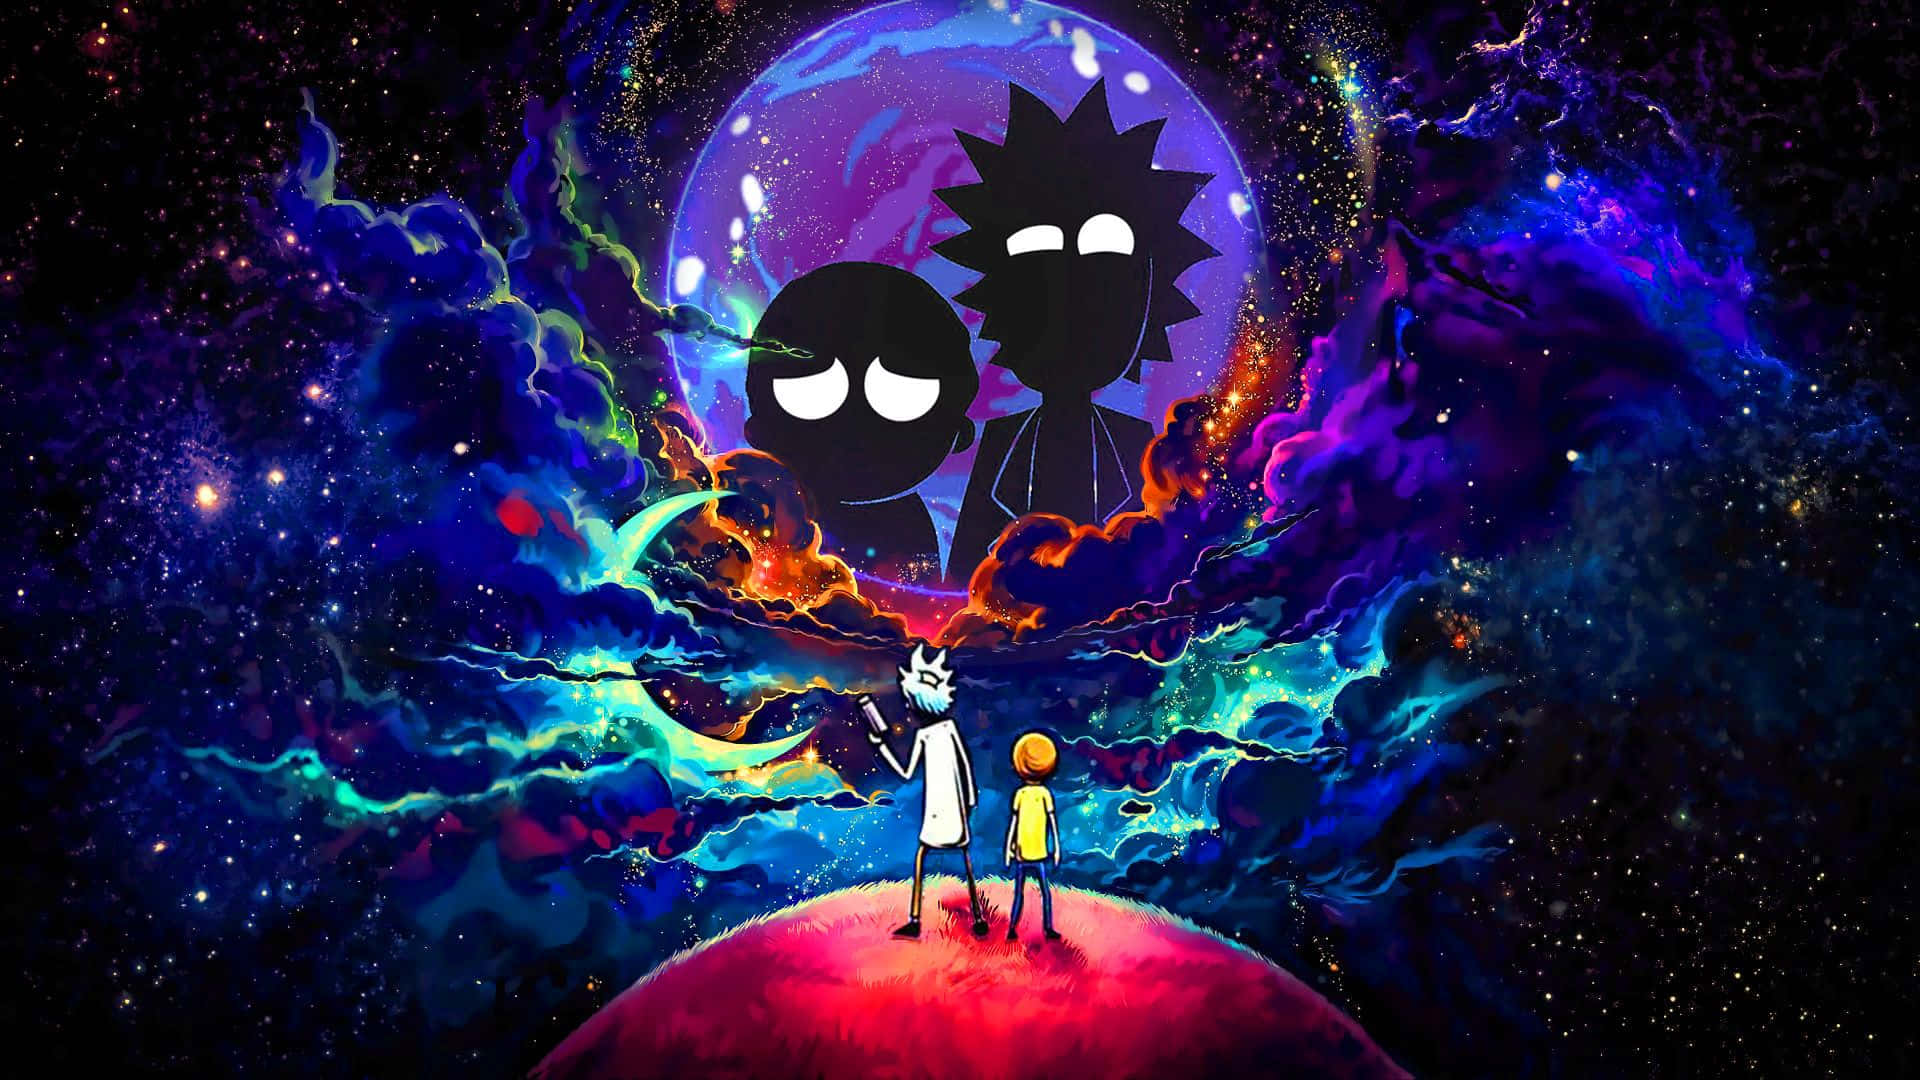 Rick and Morty in All Their 'Interdimensional' Glory Wallpaper